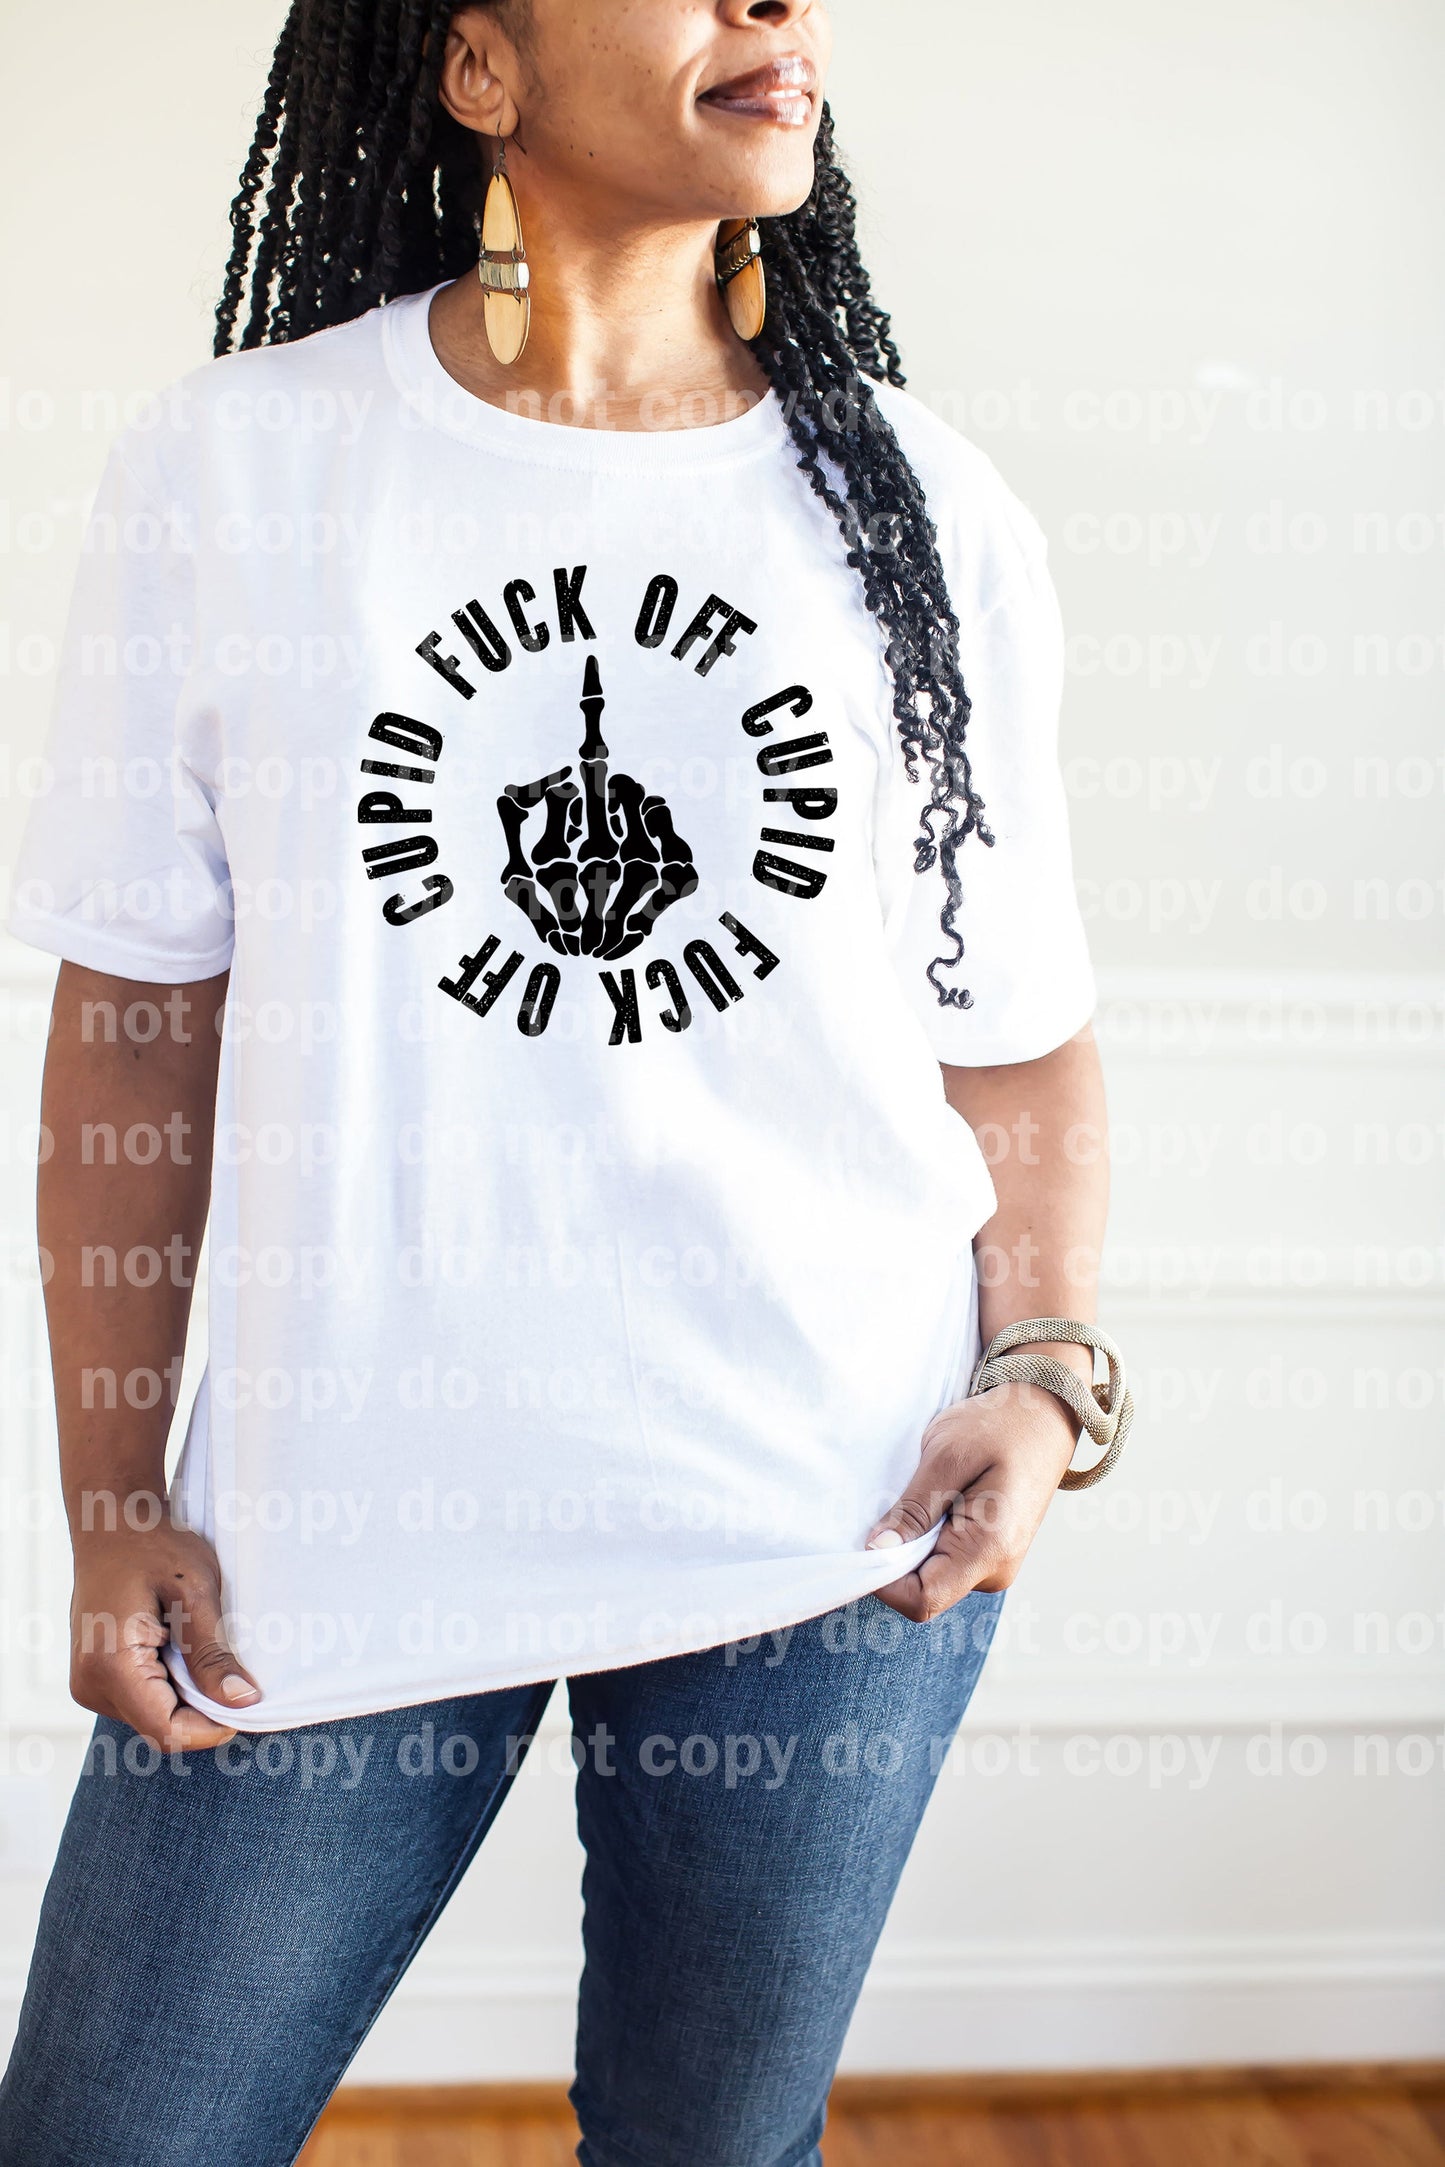 Fuck Off Cupid Black/White Dream Print or Sublimation Print